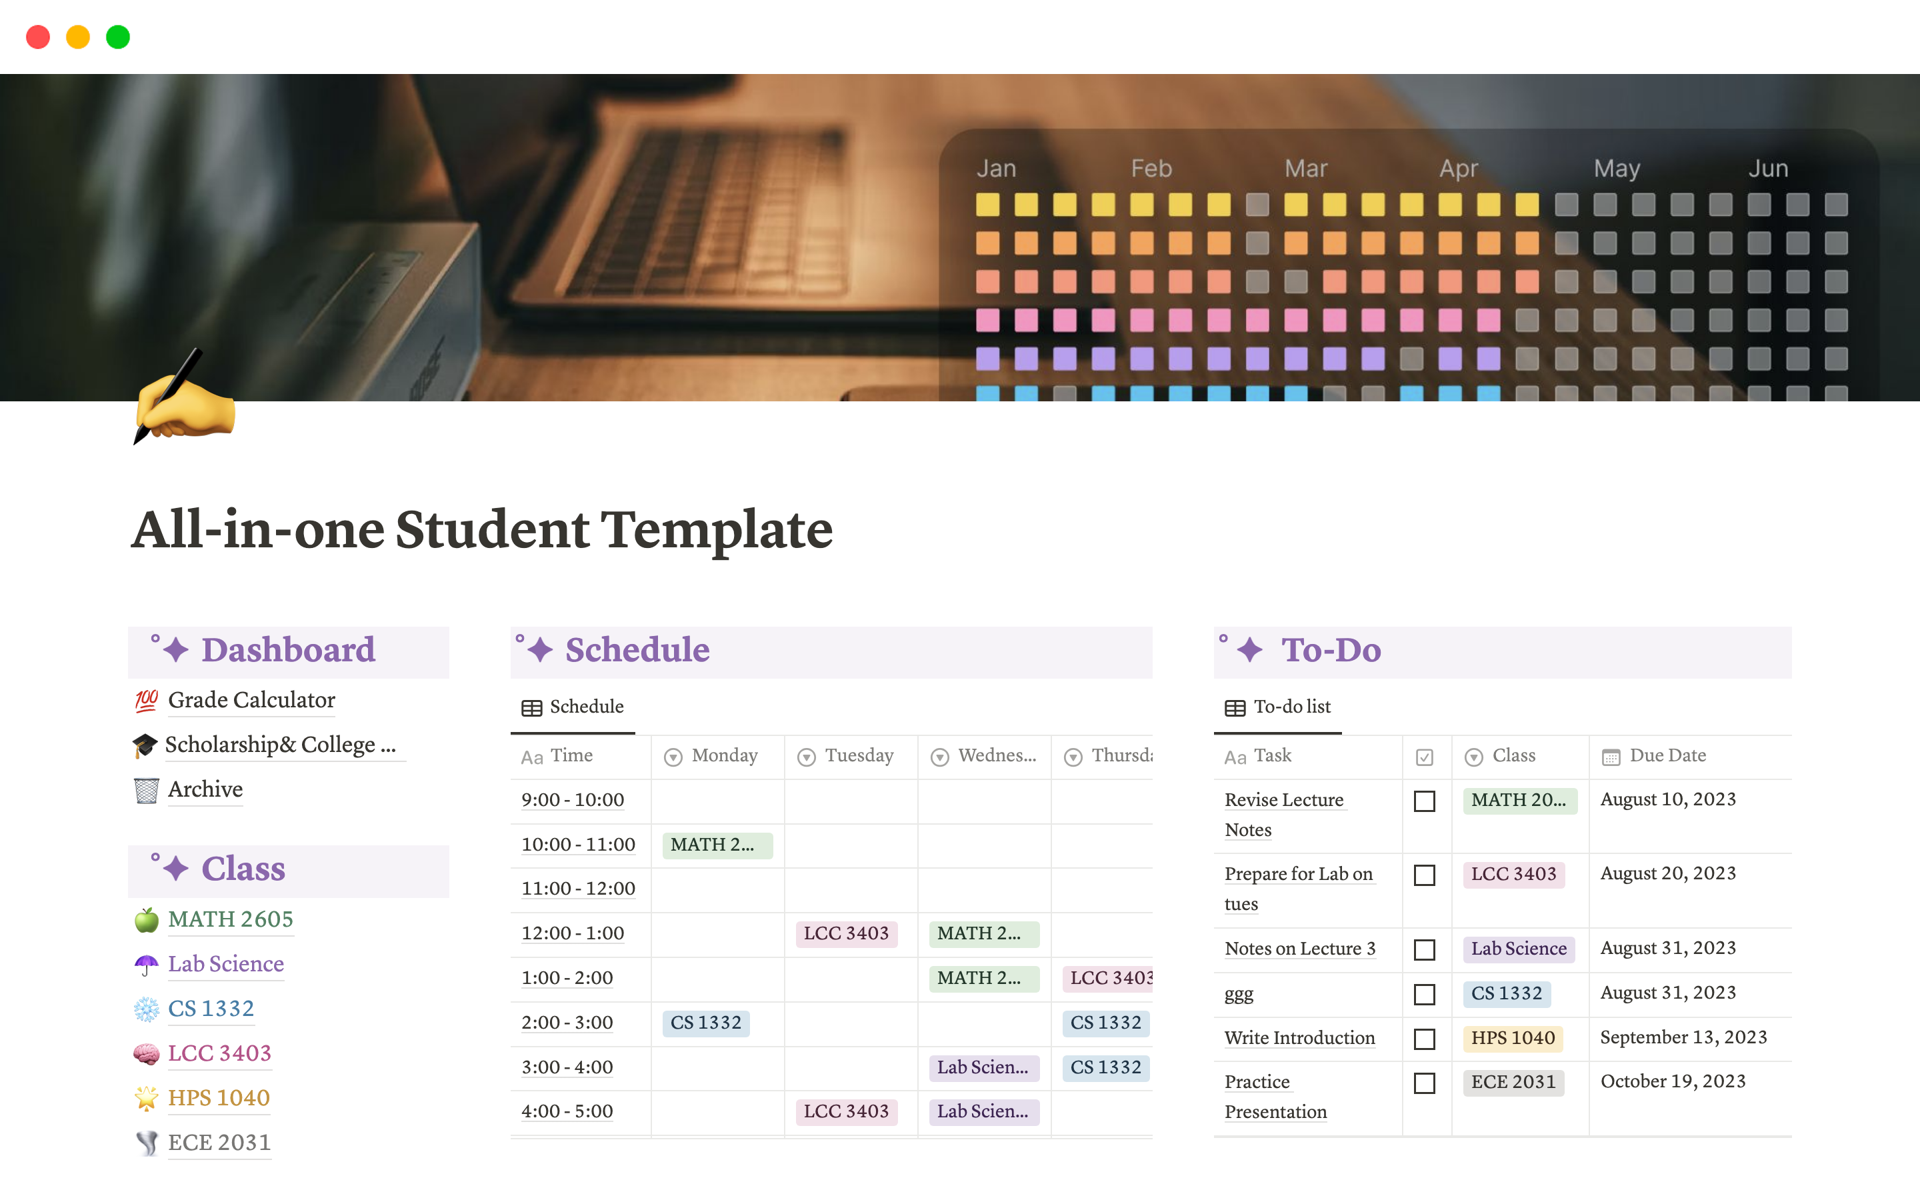 All-in-one Student Templateのテンプレートのプレビュー